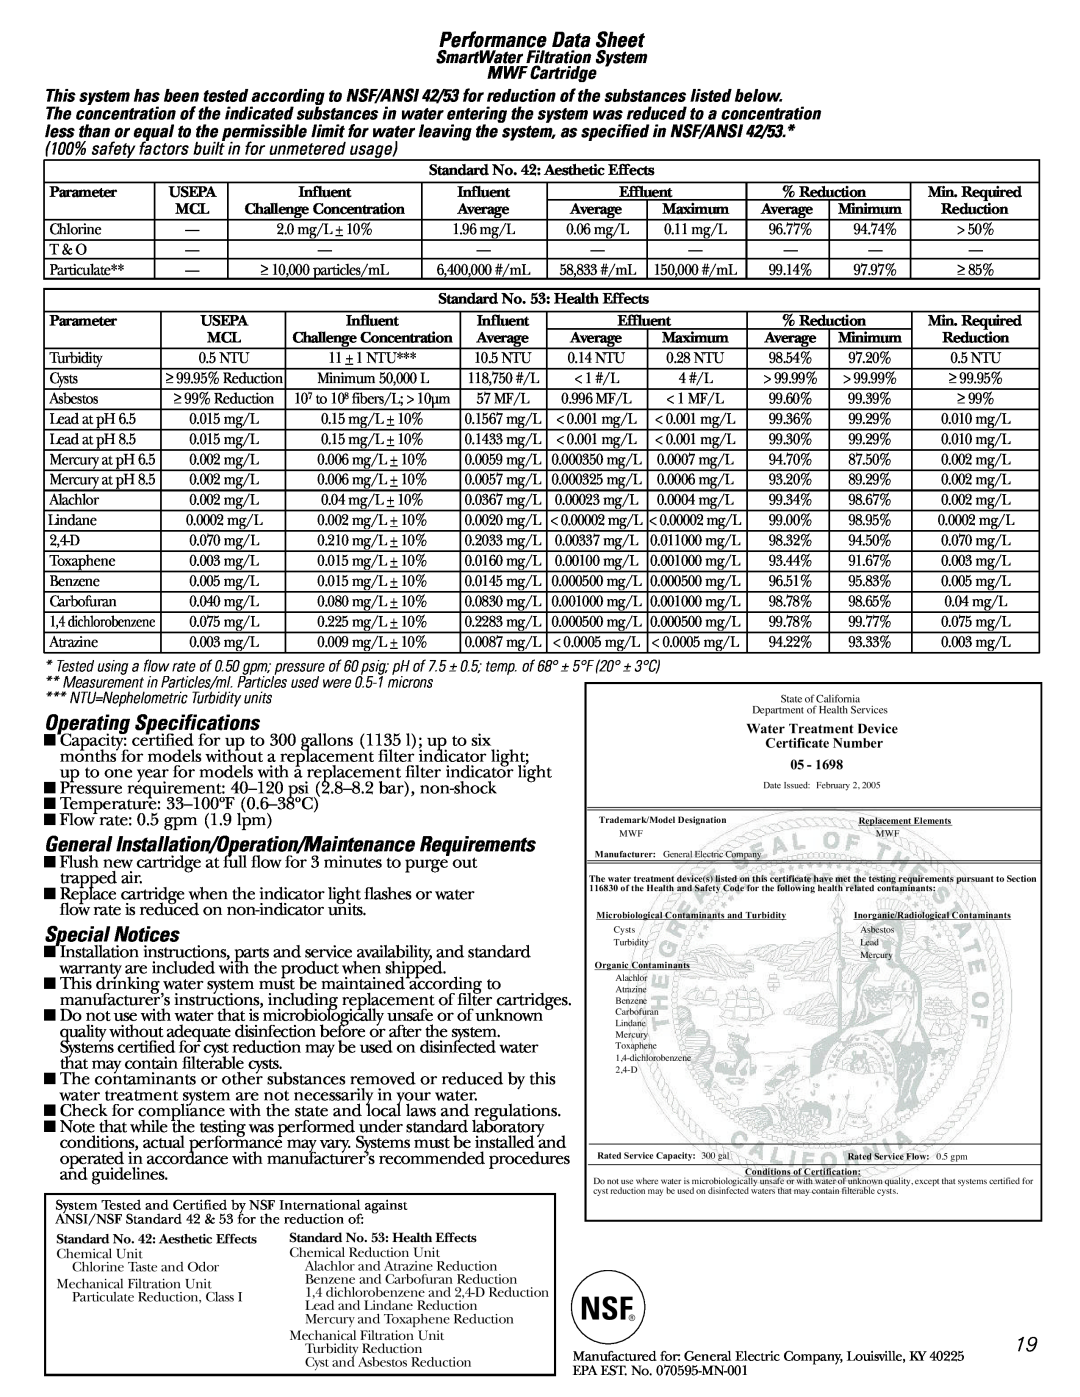 GE 20 manuel dutilisation Performance Data Sheet, Operating Specifications, Special Notices 